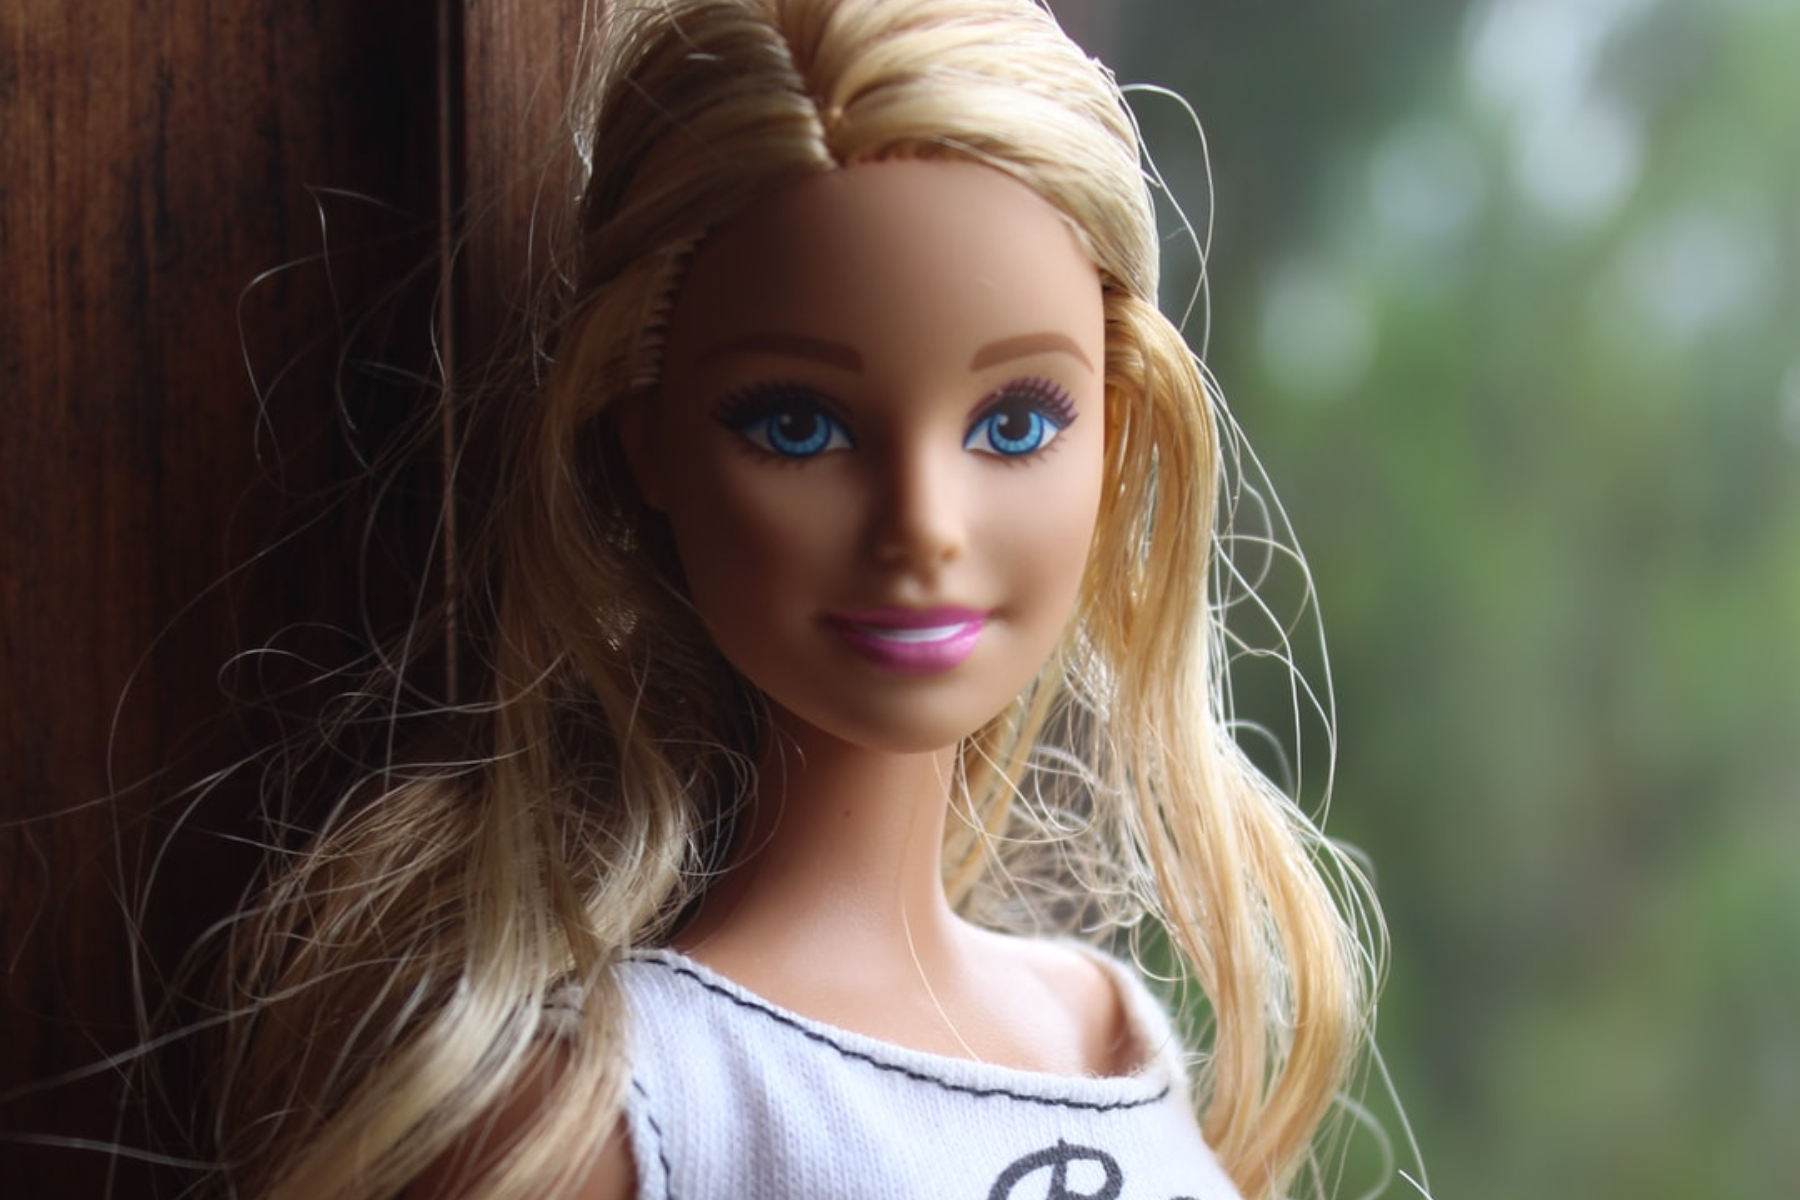 A close up of a Barbie doll